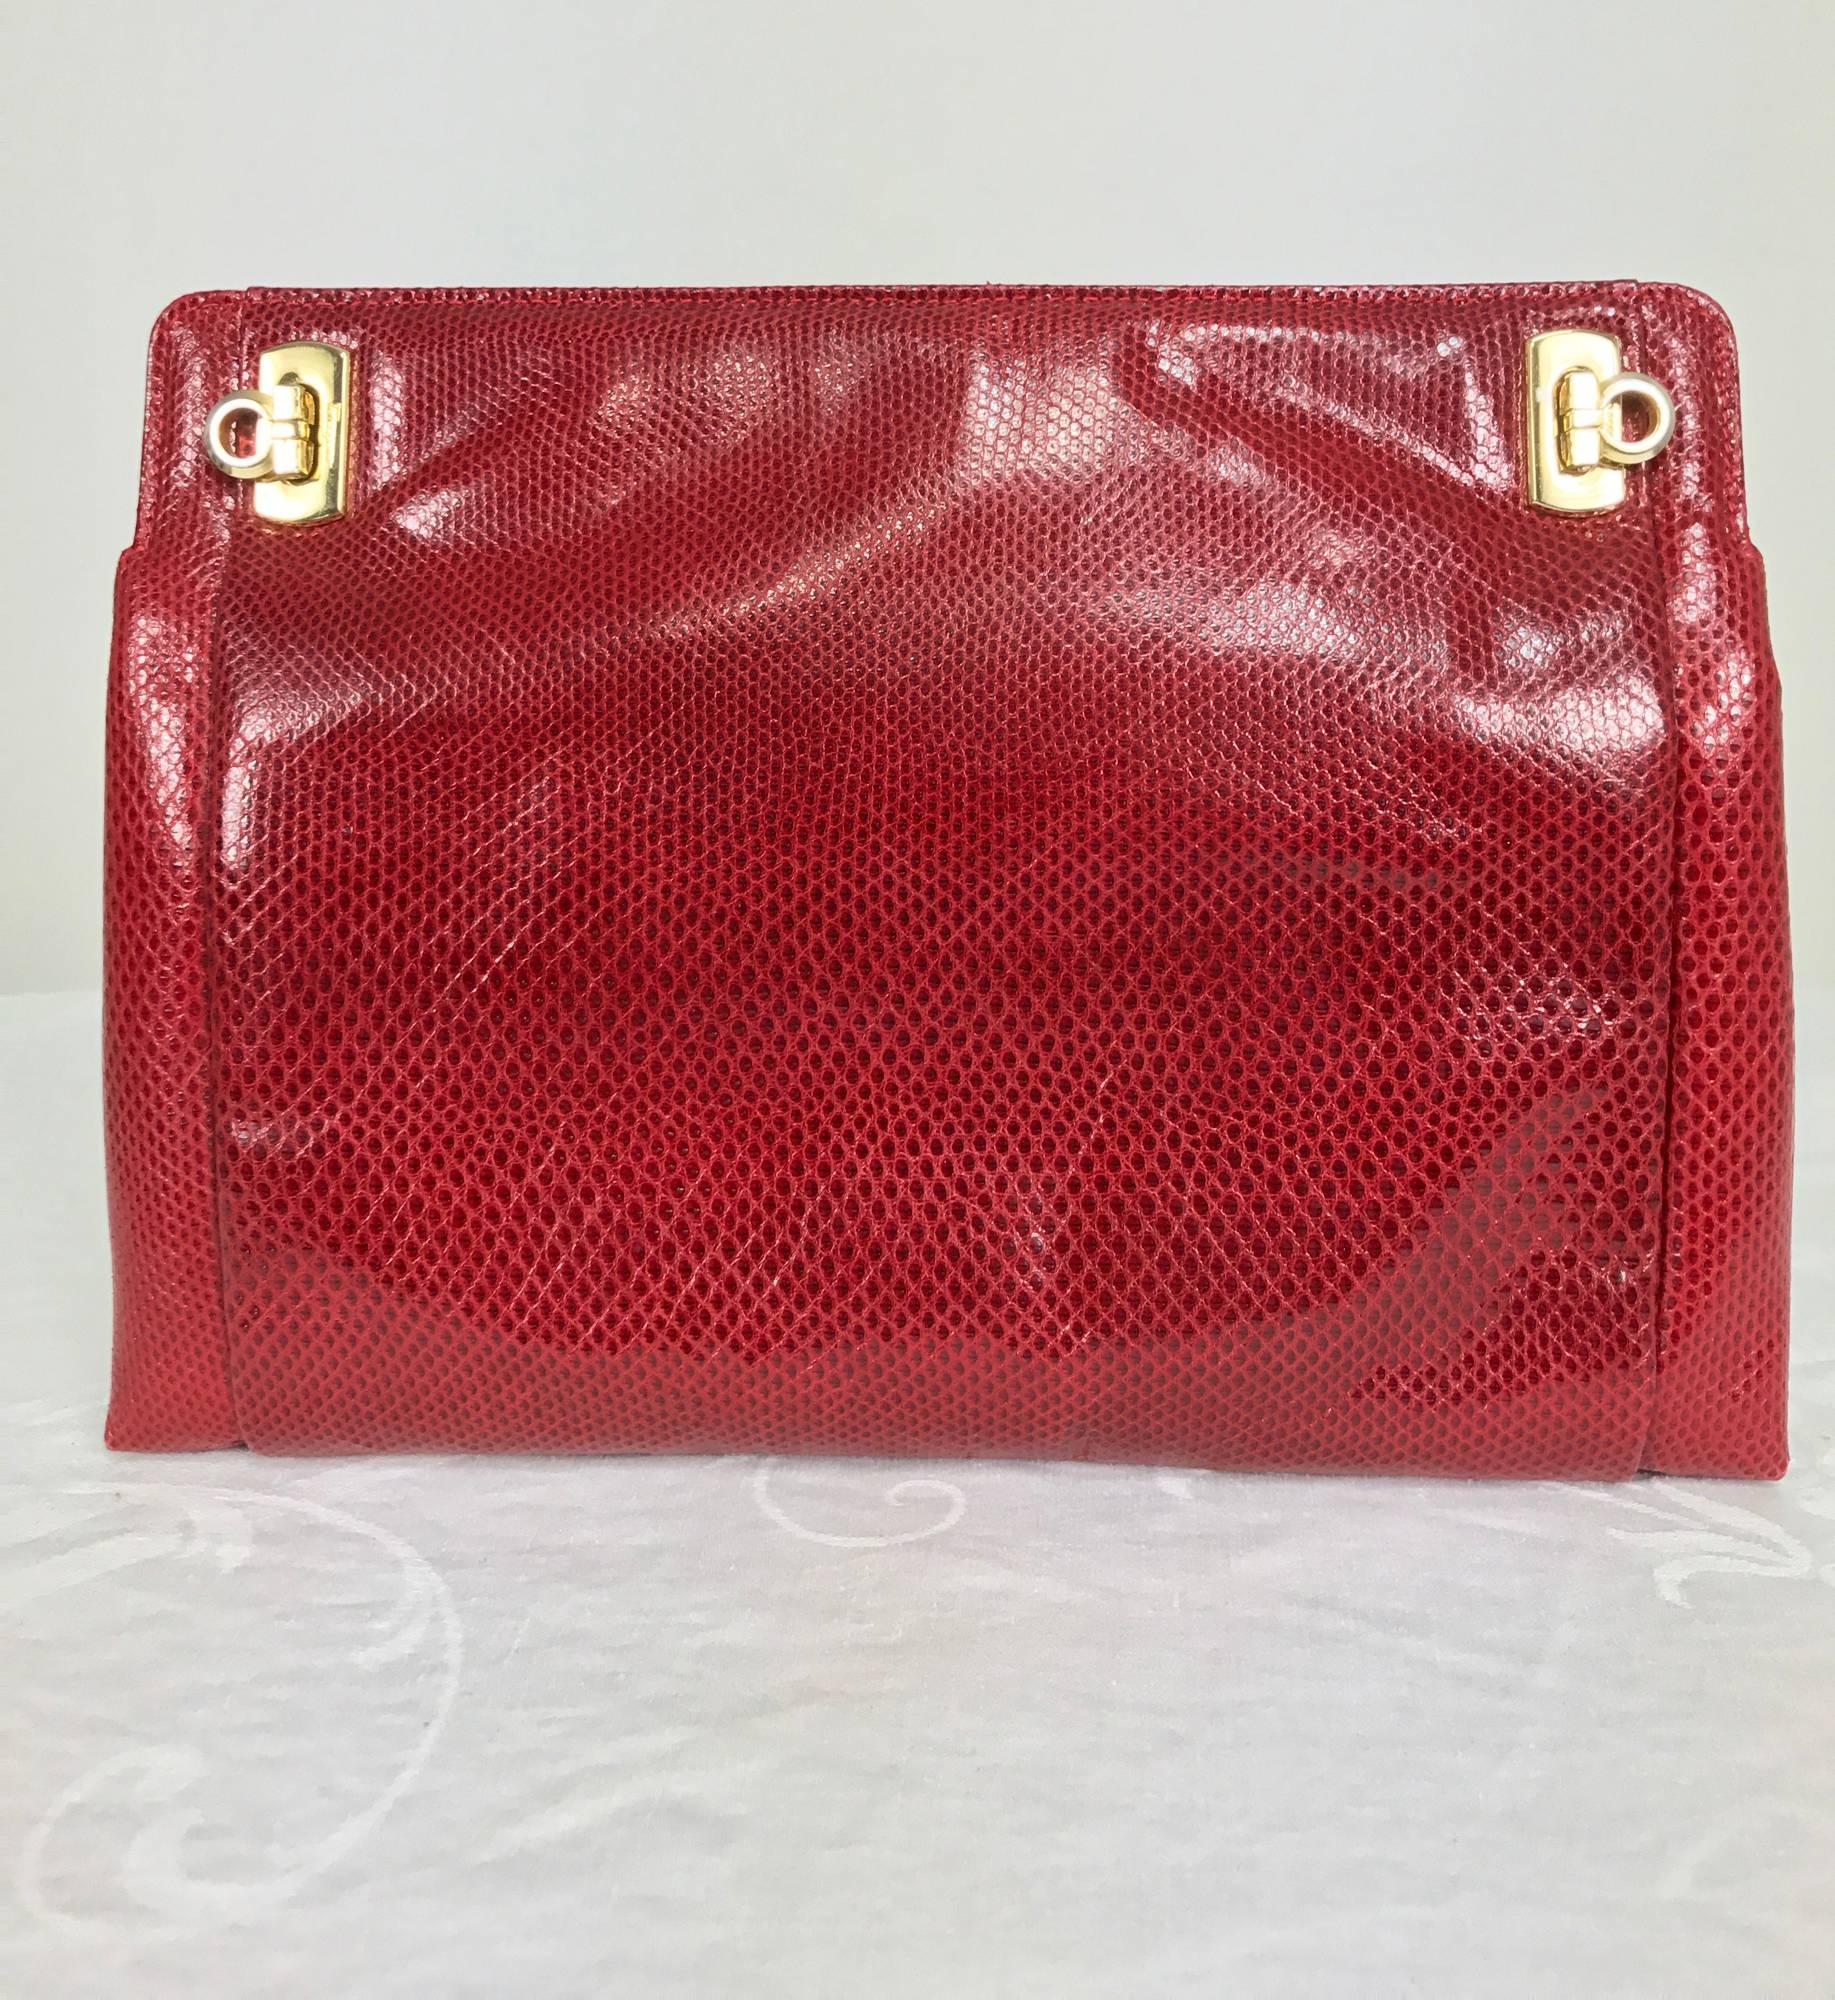 Vintage Ferragamo red lizard clutch cross body handbag 1980s...Cherry red lizard bag has gold hardware closes with 2 turn locks at the front top of bag...Long narrow shoulder strap has gold clasps to use or remove...Lined inside in black with a